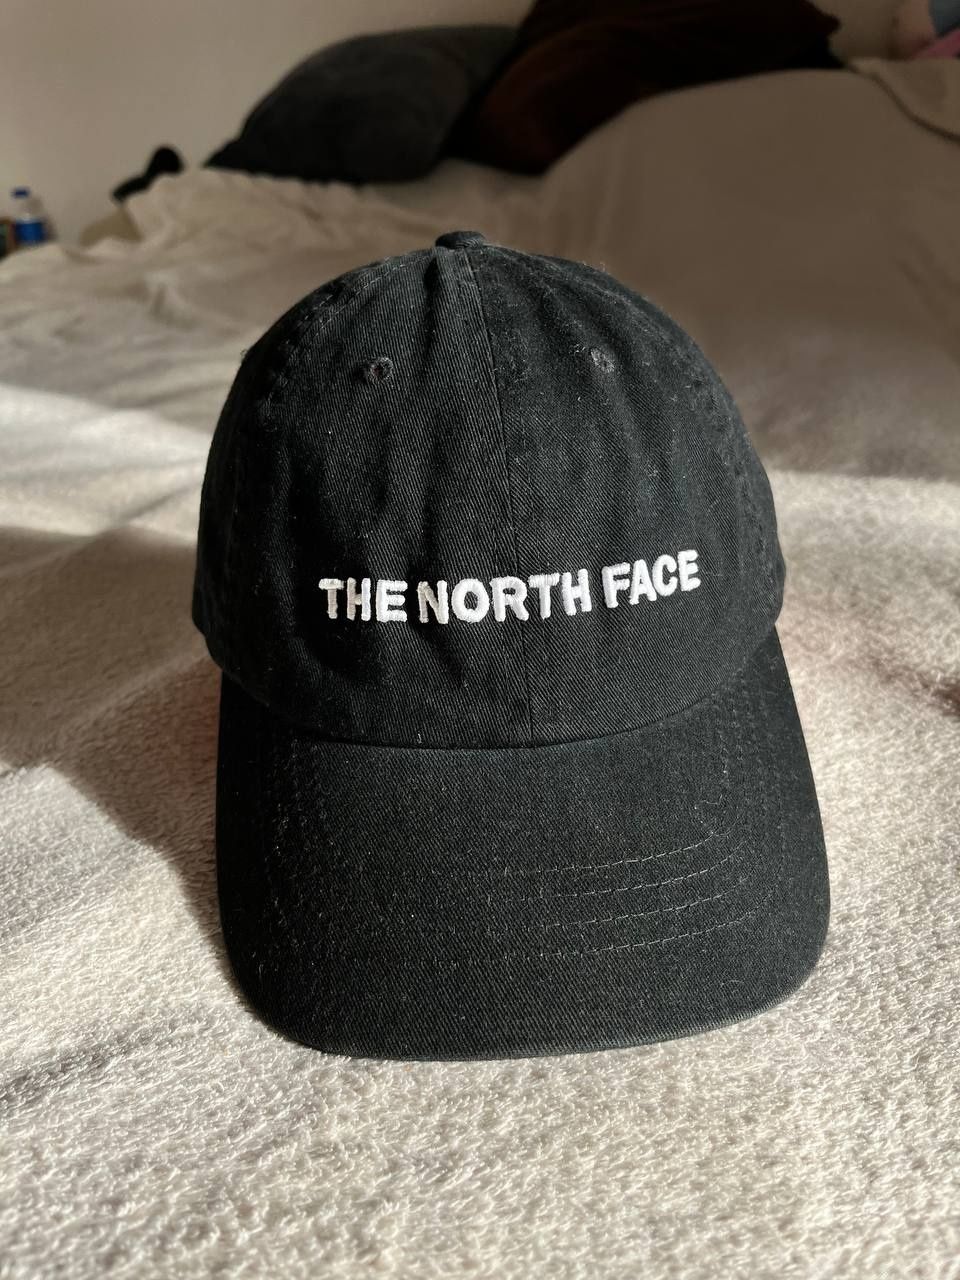 Кепка The North Face